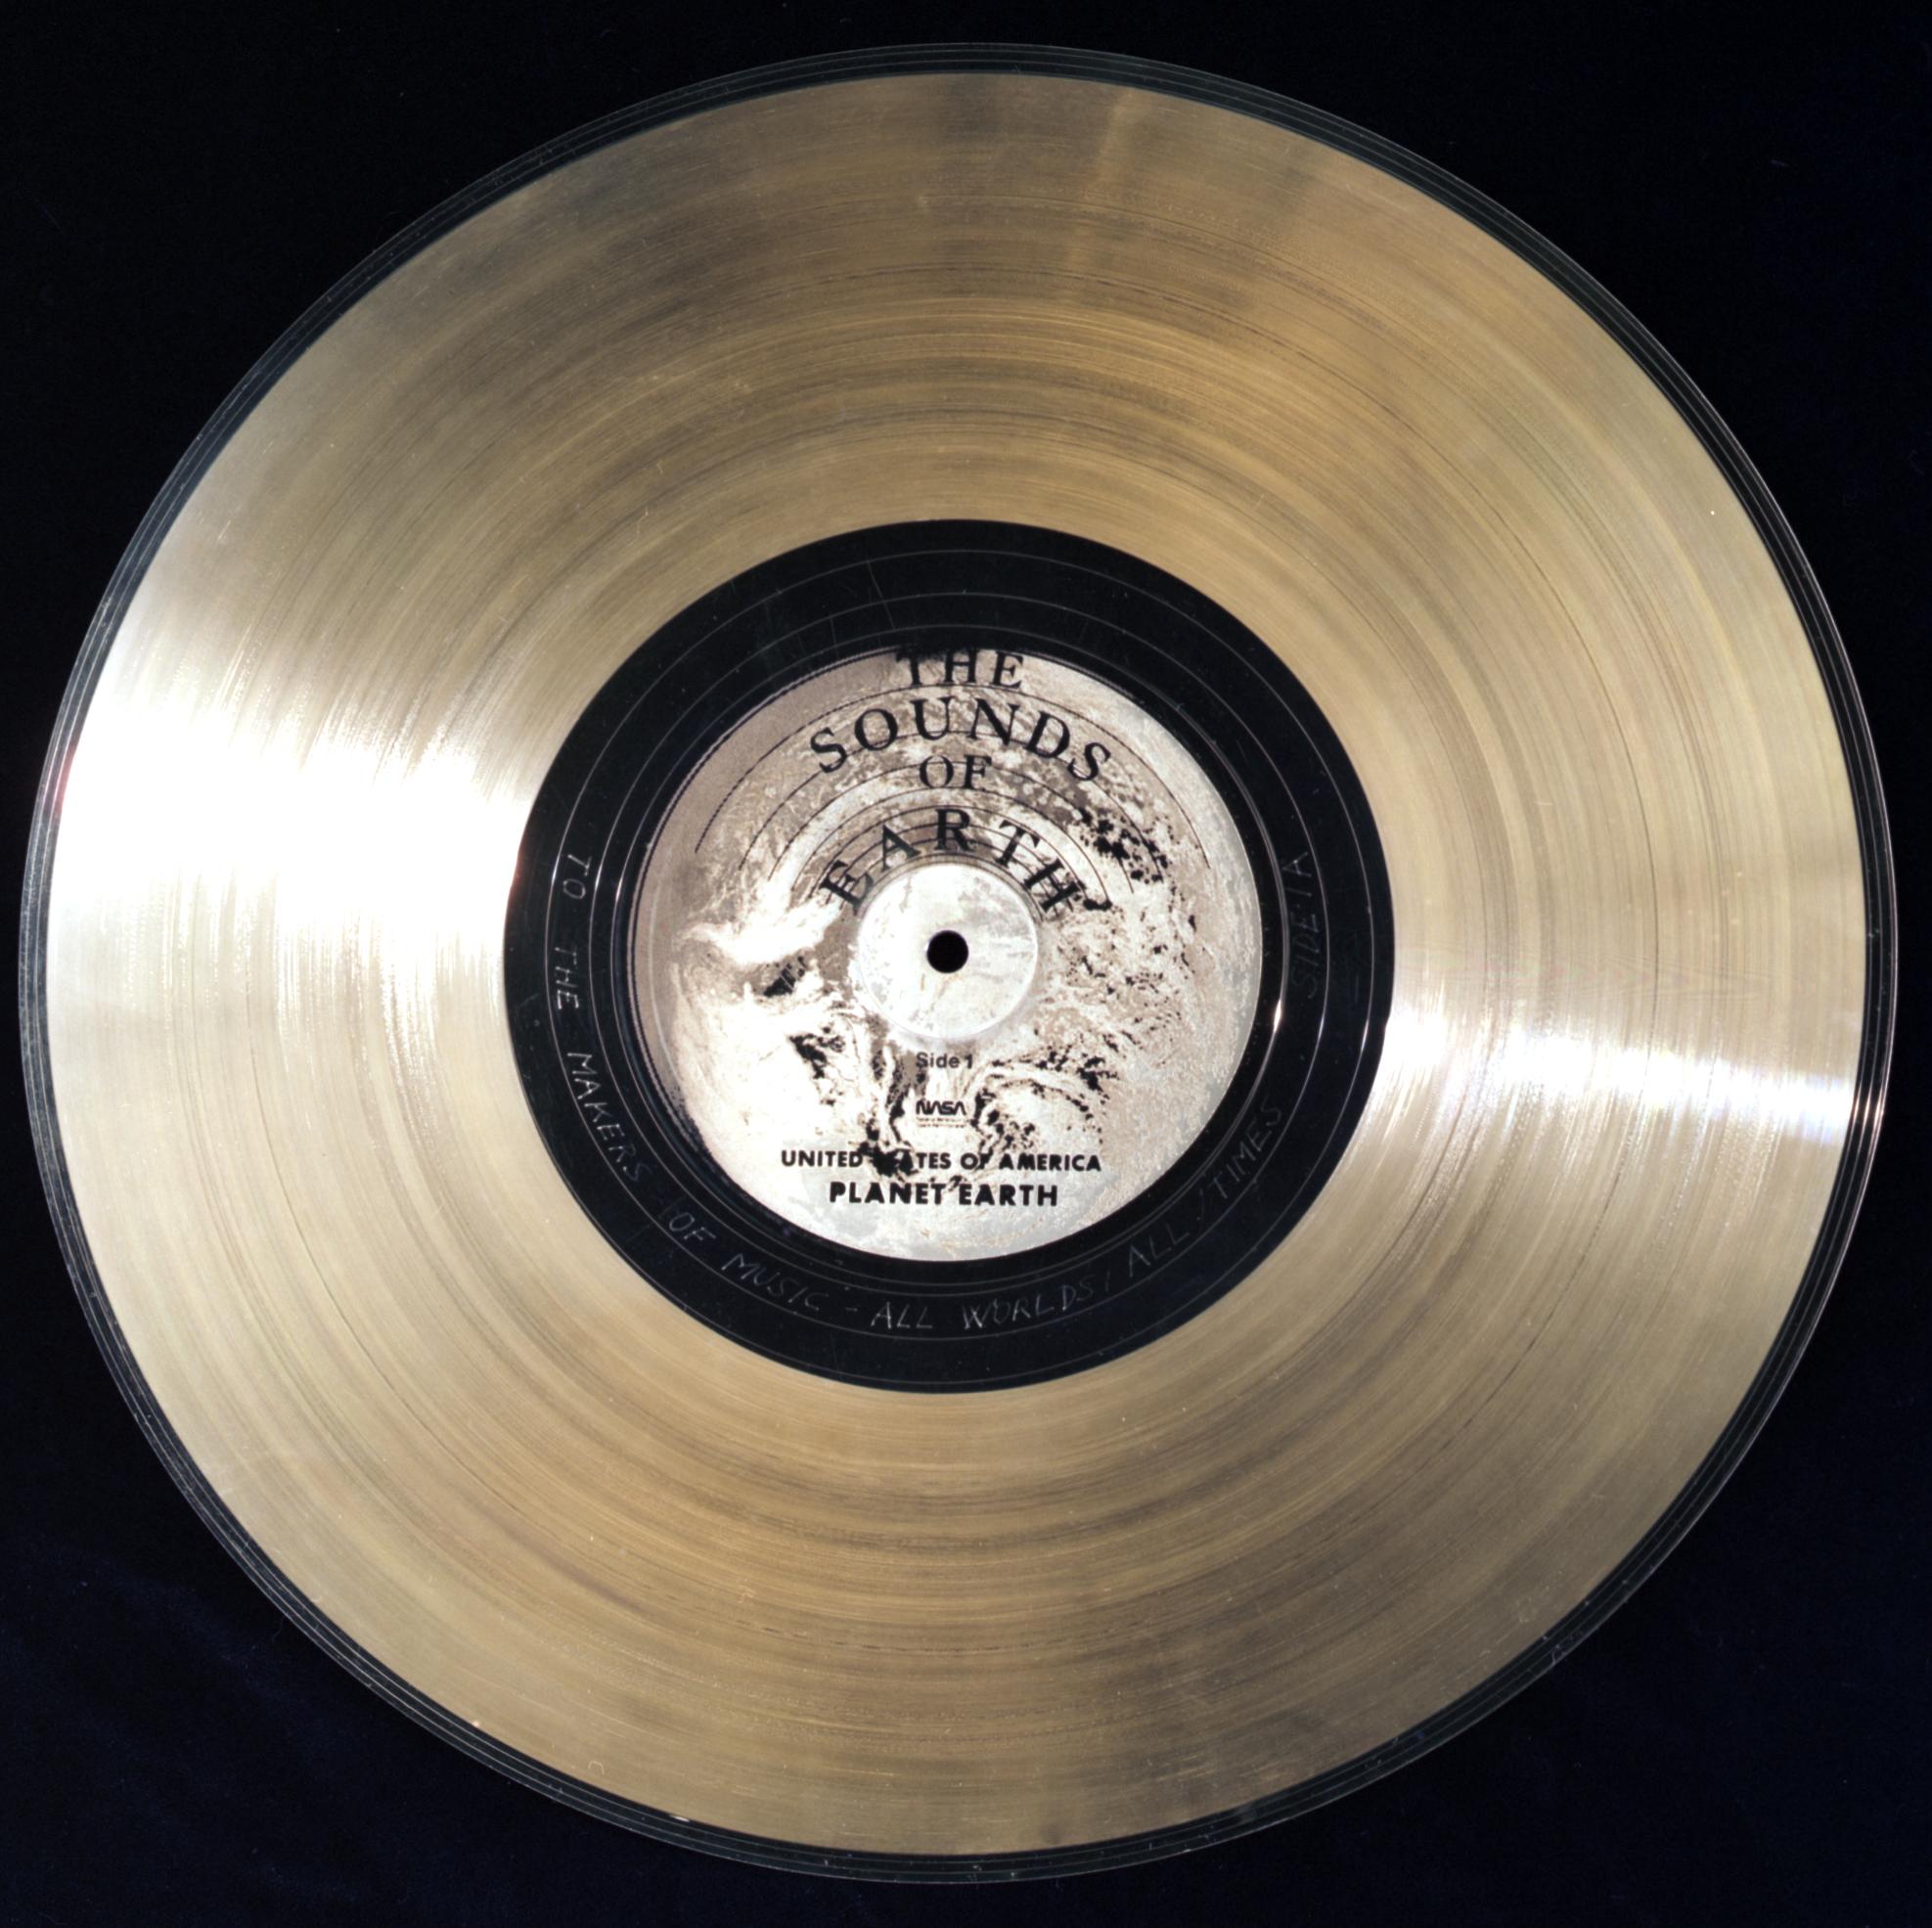 The Golden Voyager – the most expensive record of all time?